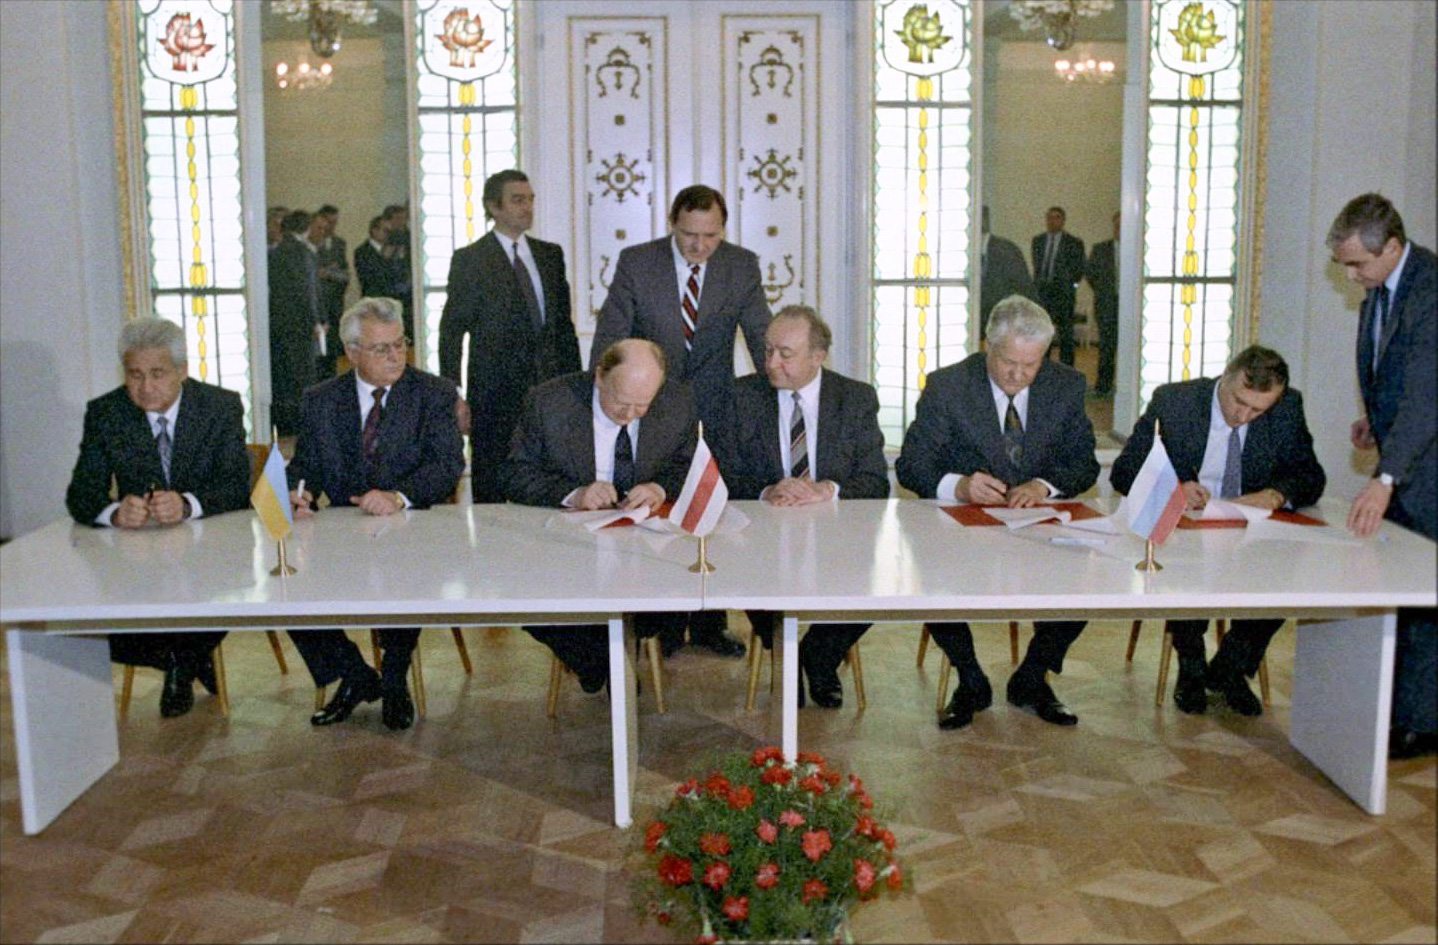 Signing the Agreement to eliminate the USSR and establish the Commonwealth of Independent States. Ukrainian President Leonid Kravchuk (second from left seated), Chairman of the Supreme Council of the Republic of Belarus Stanislav Shushkevich (third from left seated) and Russian President Boris Yeltsin (second from right seated) during the signing ceremony to eliminate the USSR and establish the Commonwealth of Independent States. Viskuly Government Retreat in the Belarusian National Park "Belovezhskaya Pushcha". (Image: U. Ivanov, RIAN archives via Wikipedia)